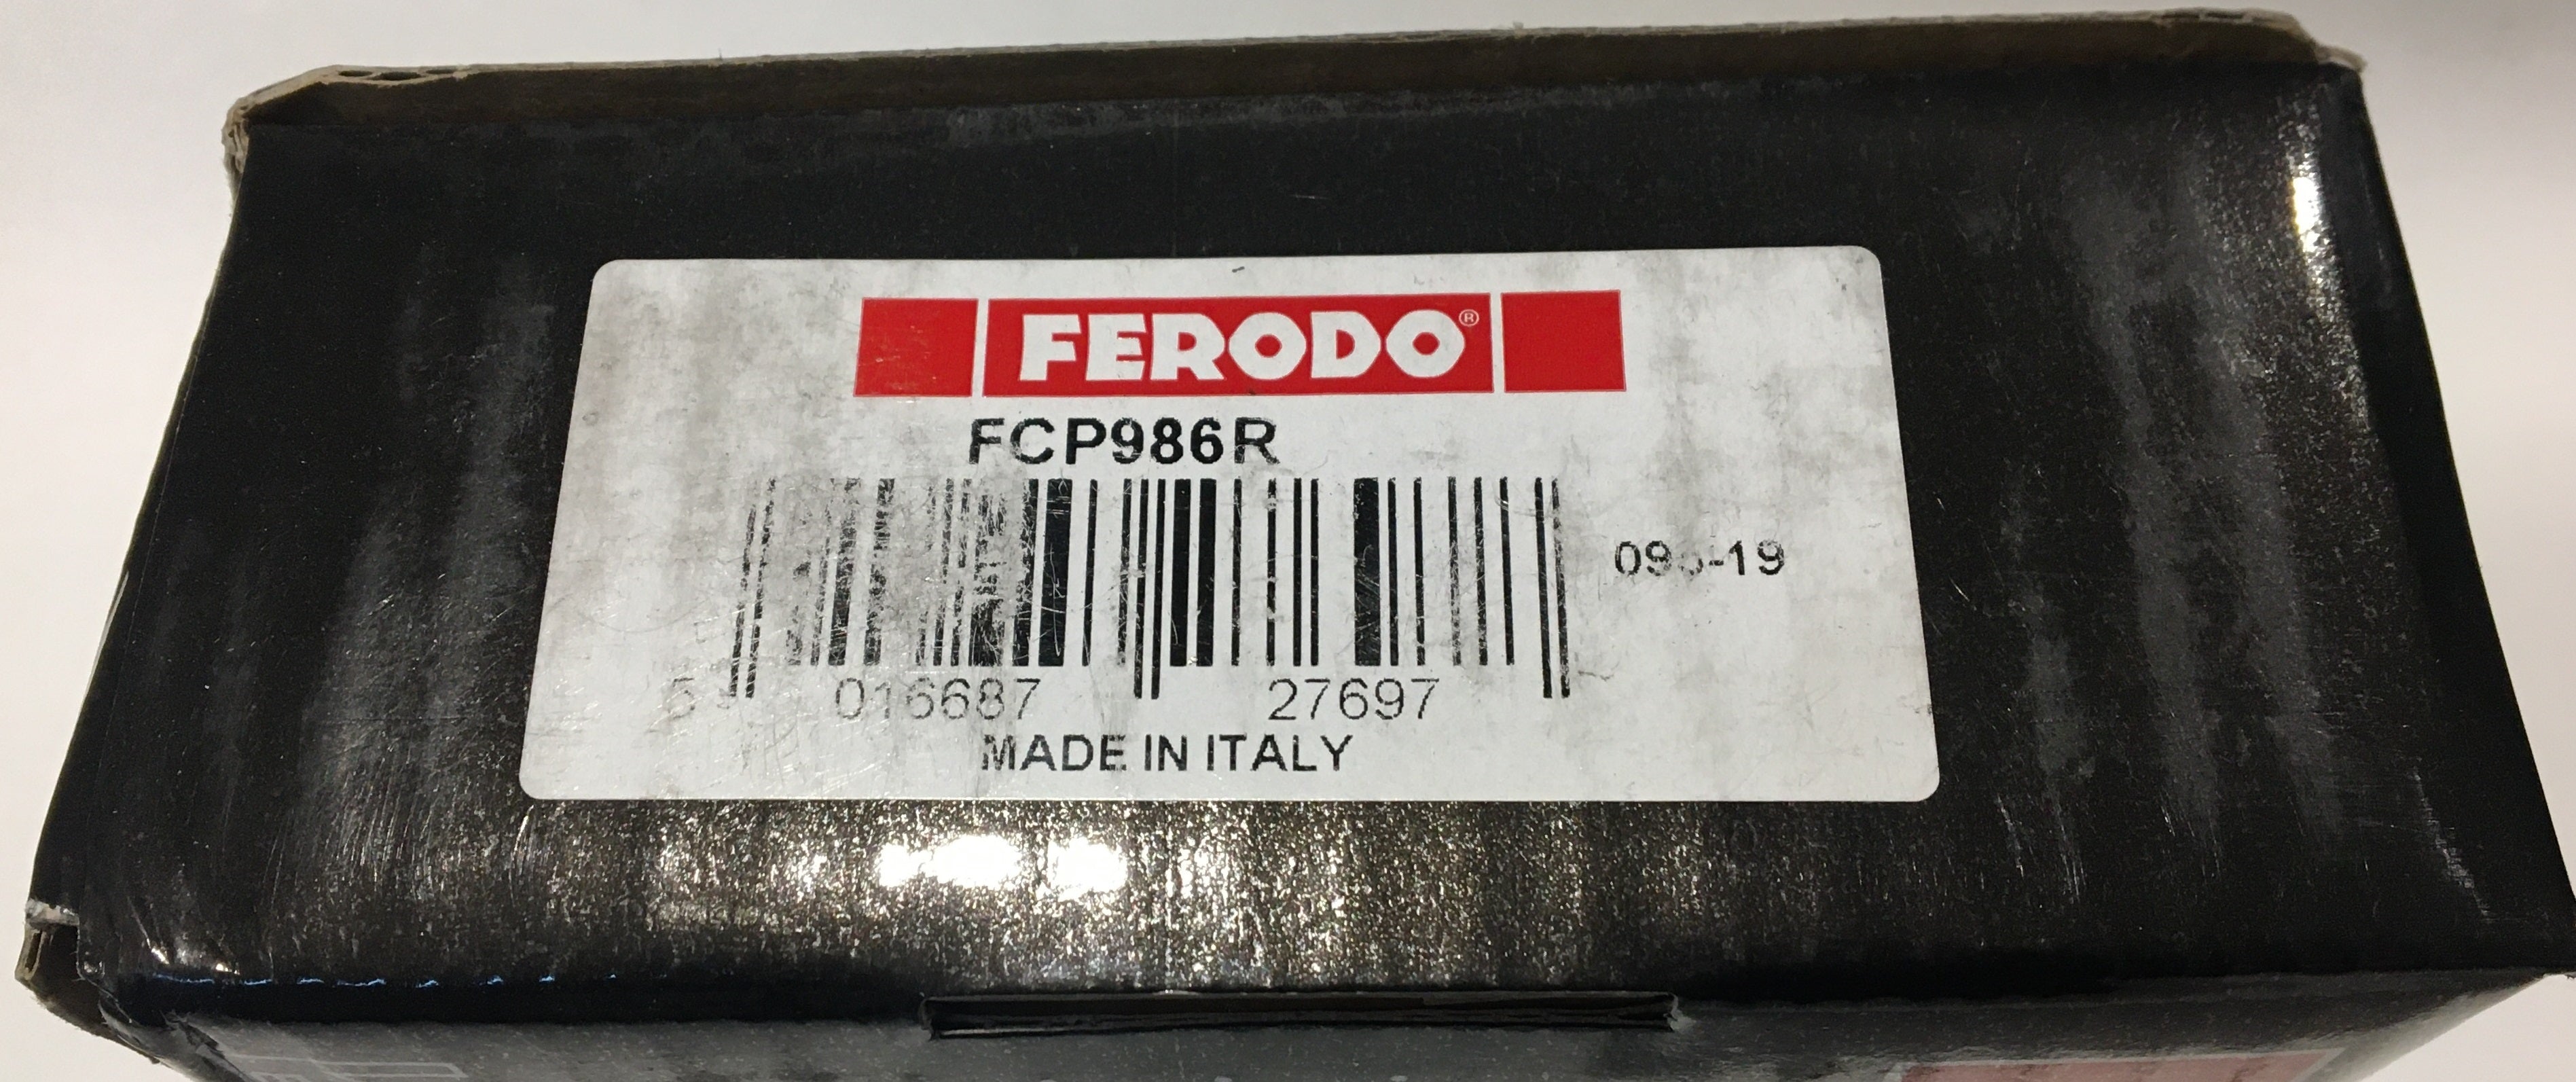 Ferodo FCP986R Front Brake Pad DS3000 – Four Star Motorsports